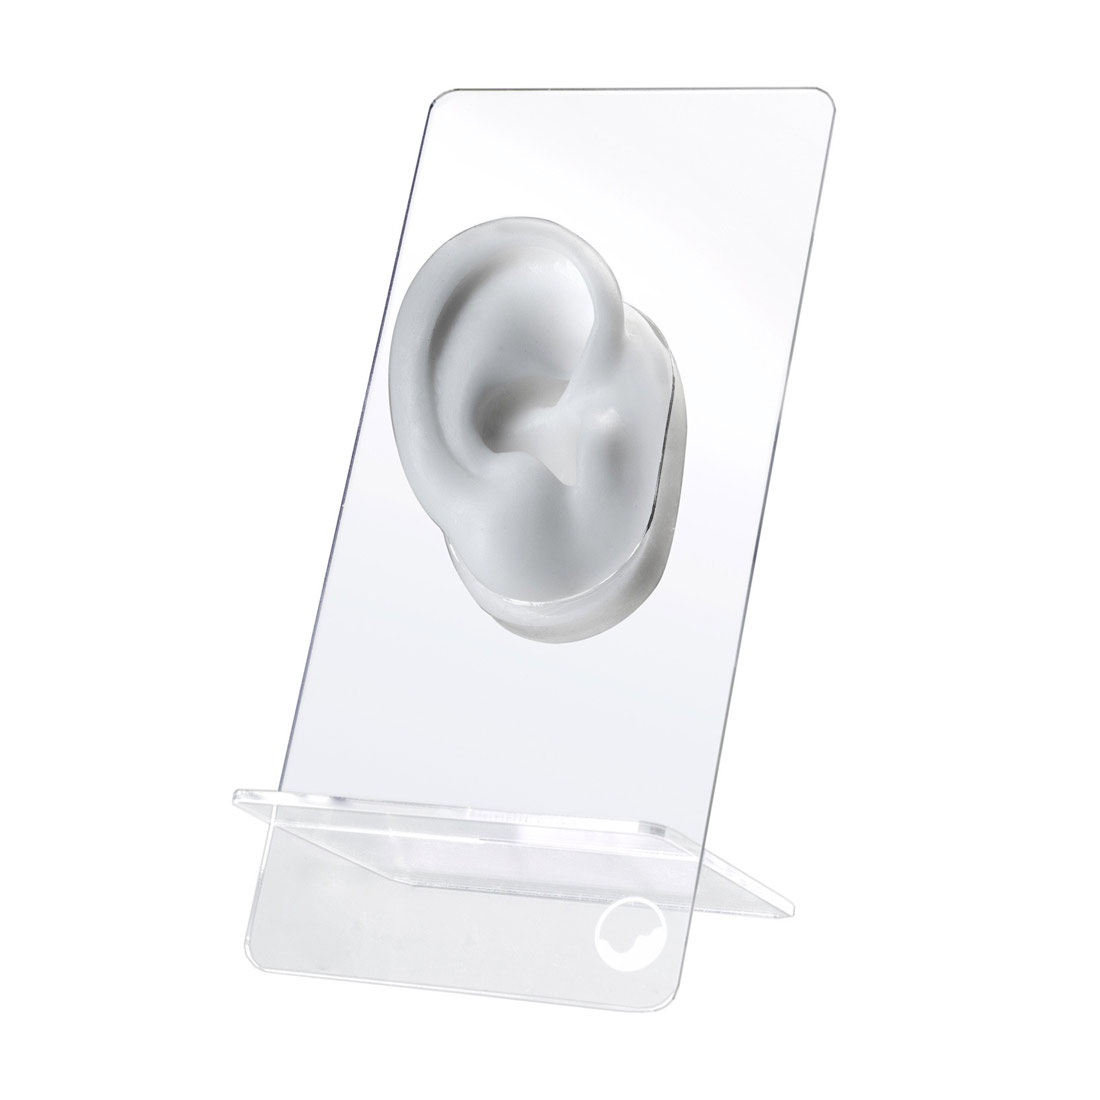 bachmaier marketing material – Presentation material hearing protection